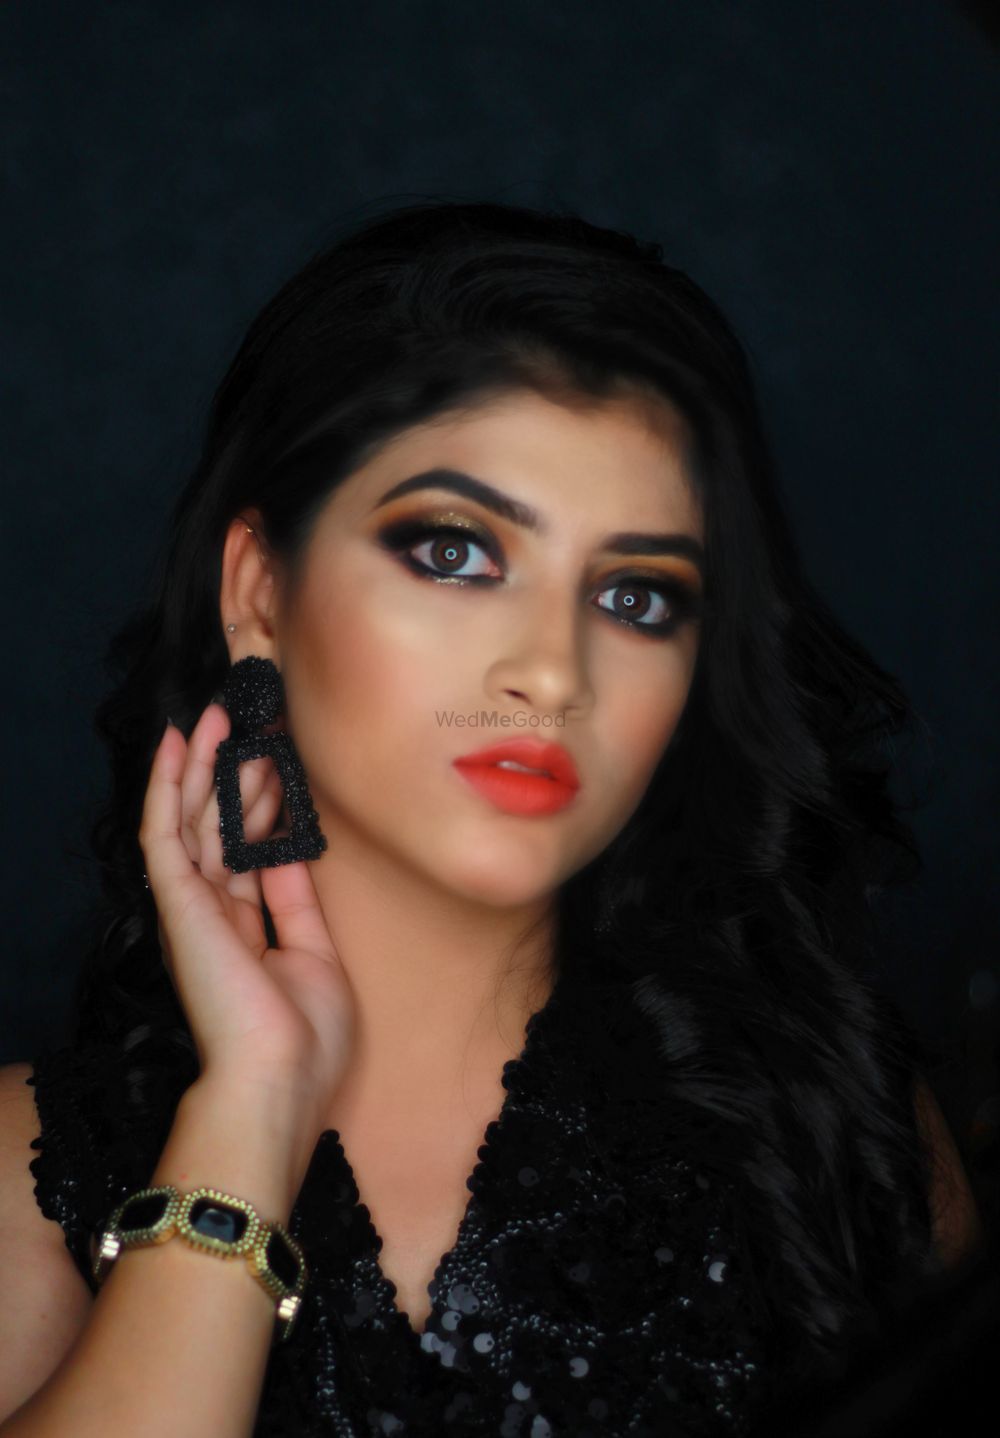 Photo From Party Makeup - By Makeup Artistry by Anjali